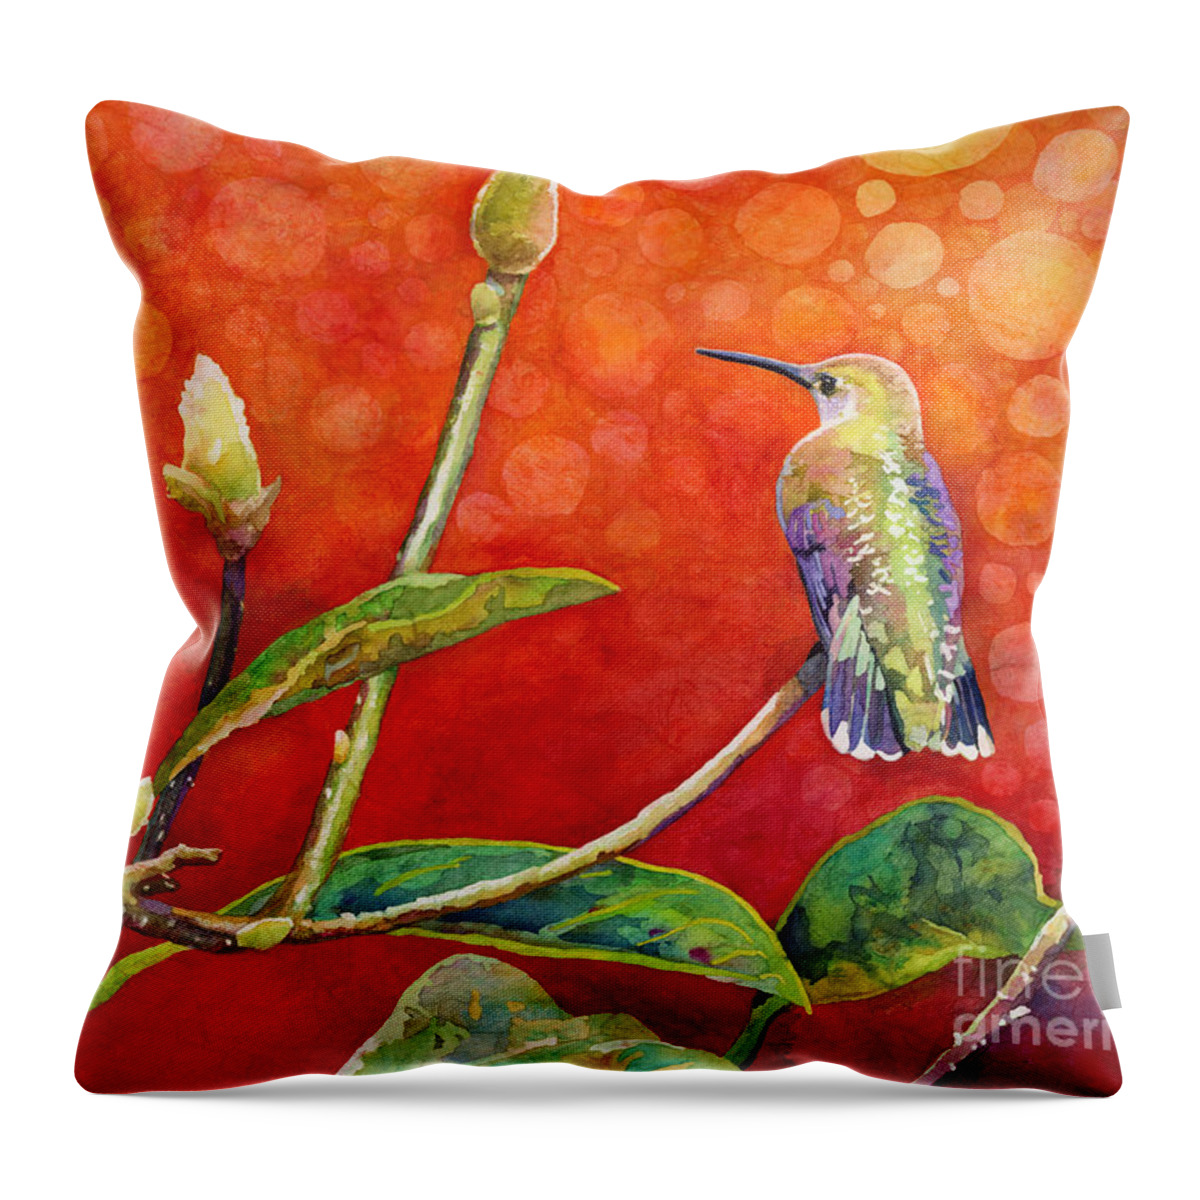 Hummingbird Throw Pillow featuring the painting Dreamy Hummer by Hailey E Herrera